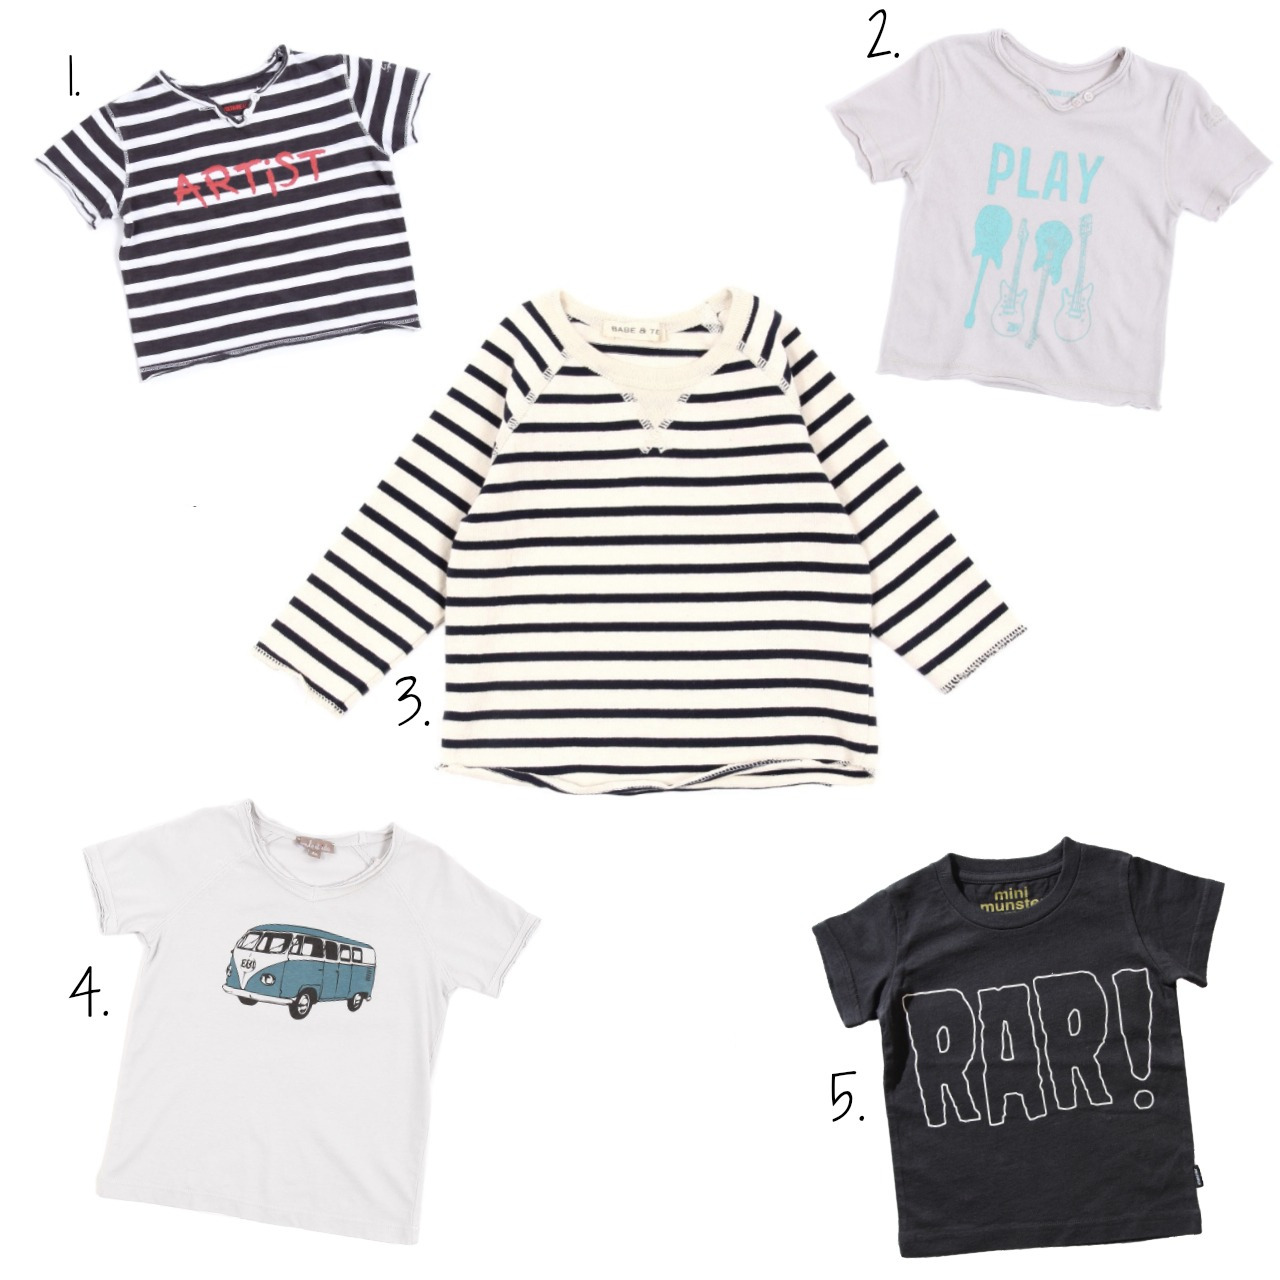 Baby’s must have tees!
1. Artist tee by Zadig&amp;Voltaire
2. Play tee by Zadig&amp;Voltaire
3. Striped tee by Babe&amp;Tess
4. Kleinbus tee by Emile et Ida 
5. Sketchosaurus tee by Munster kids
Check them out // Smallable and Orange Mayonnaise